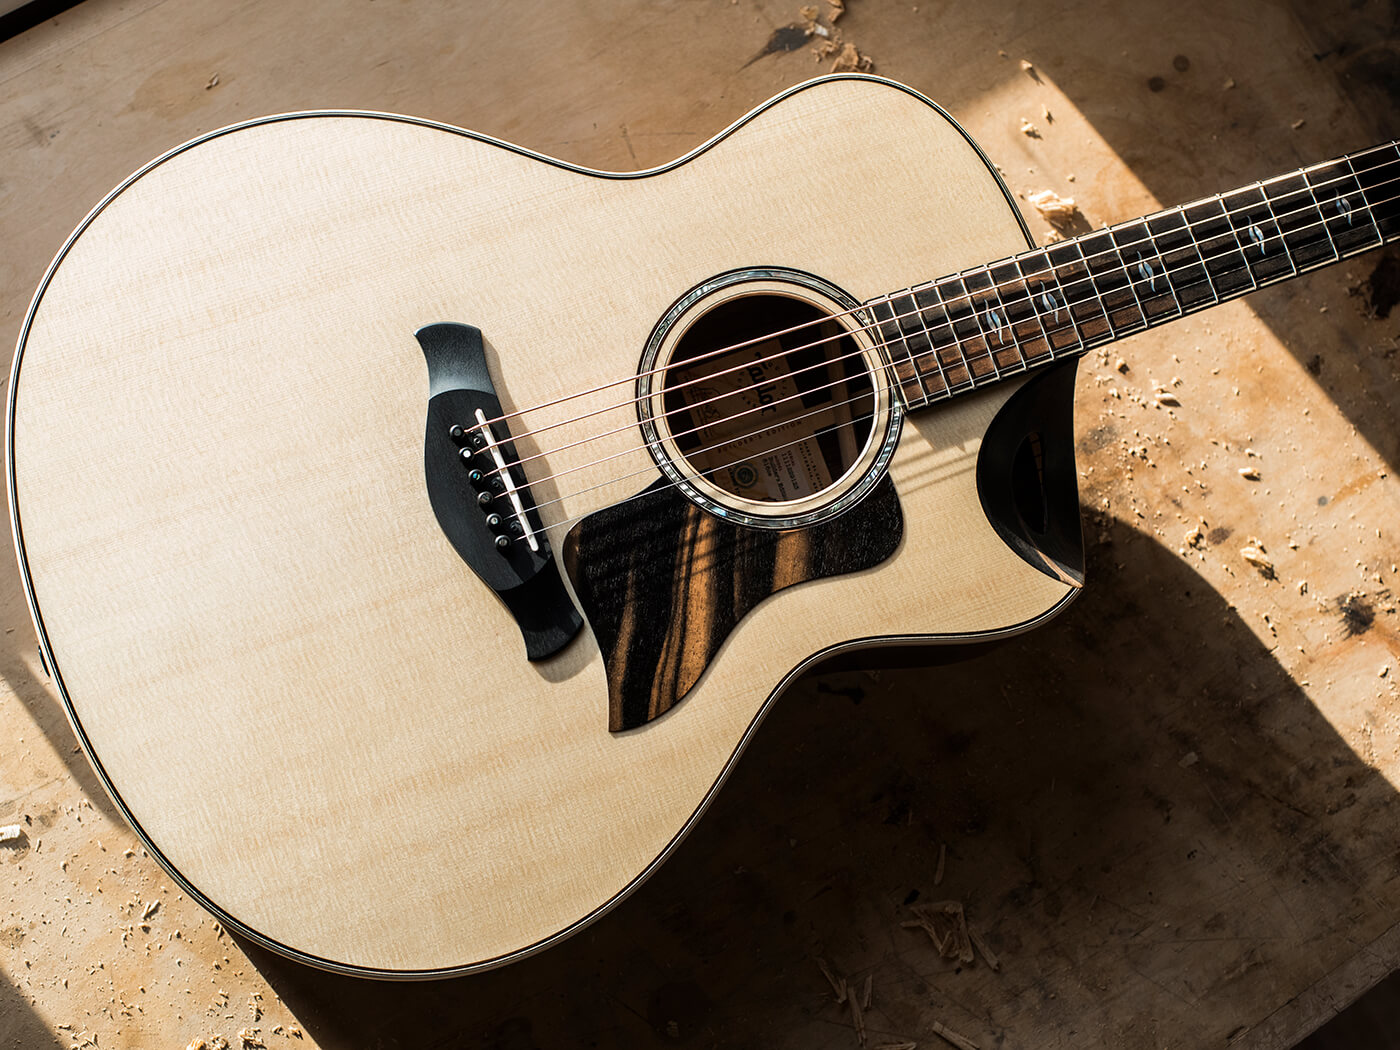 NAMM 2020: Taylor digs deep, unveils new models and expands